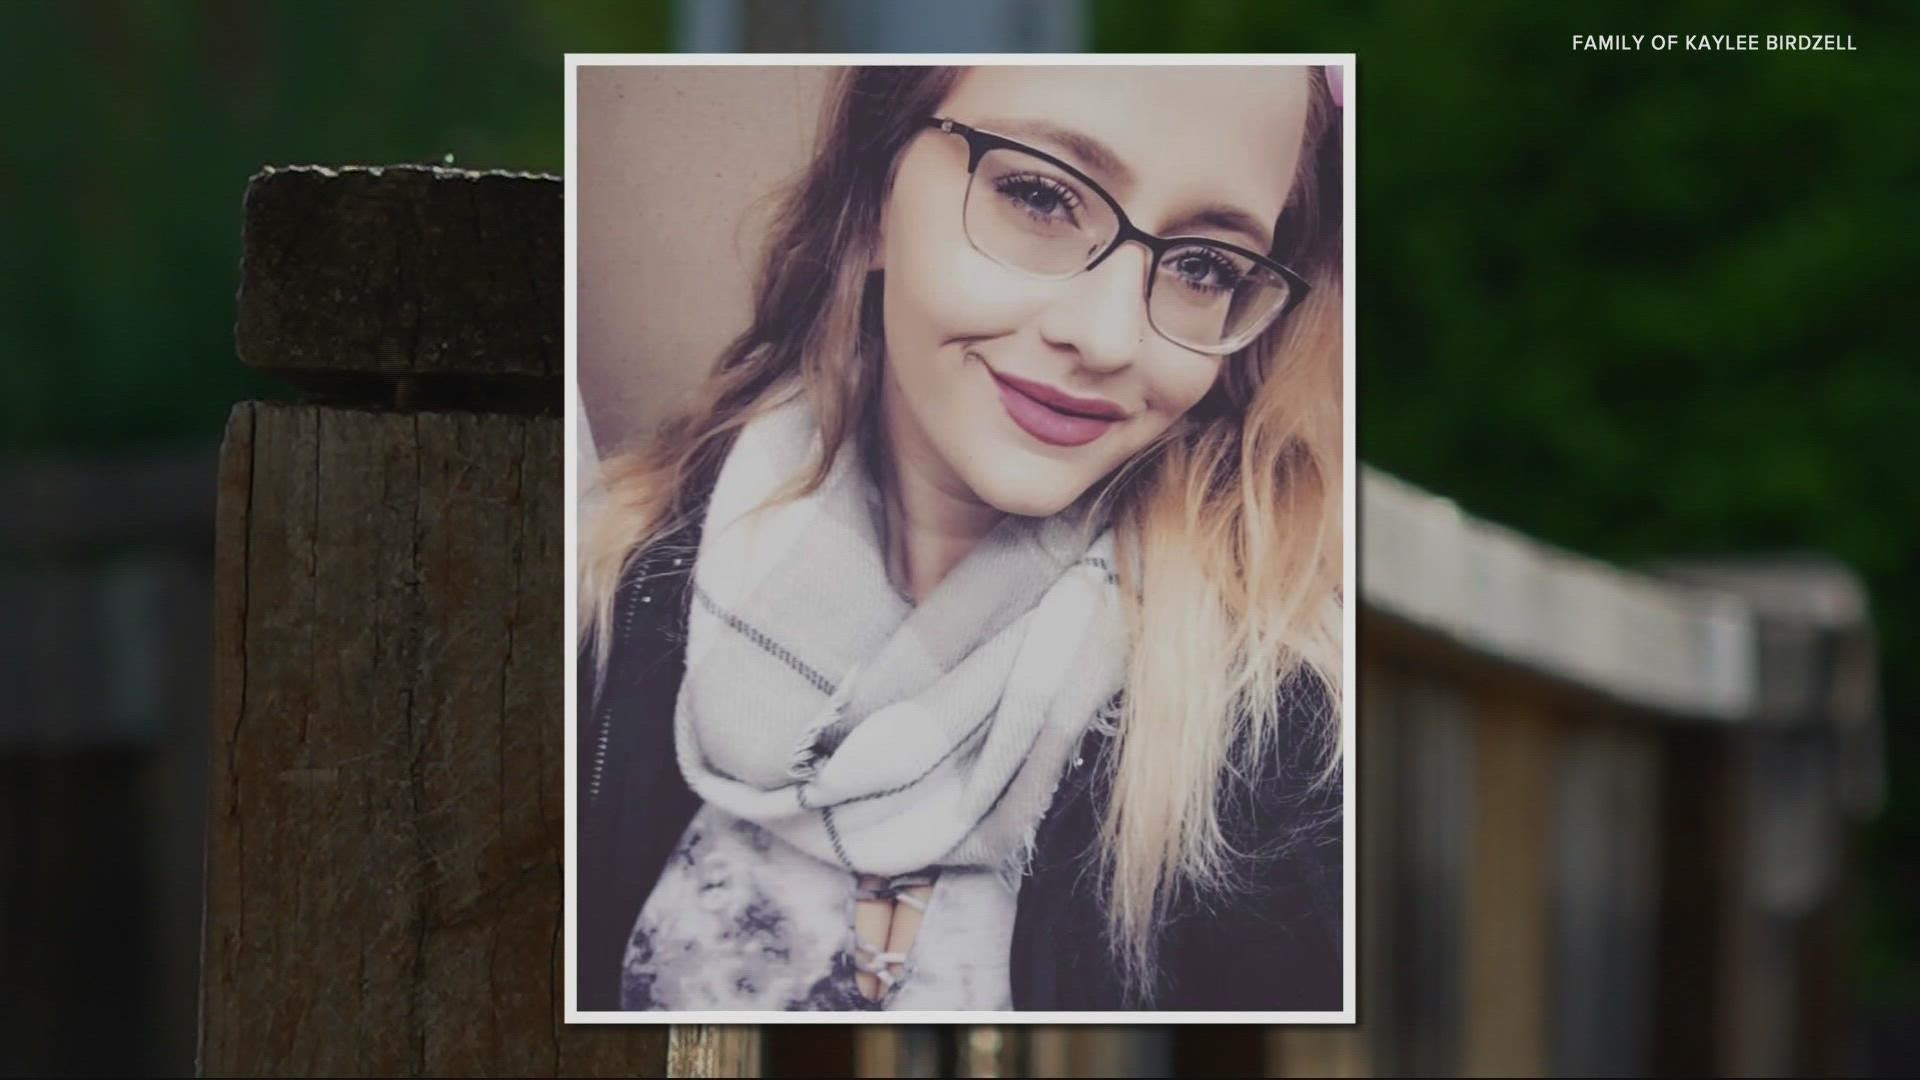 Family members of Kaylee Birdzell, 27, reported her missing on Aug. 5. Days later, her body was found at the Coffin Butte Landfill.